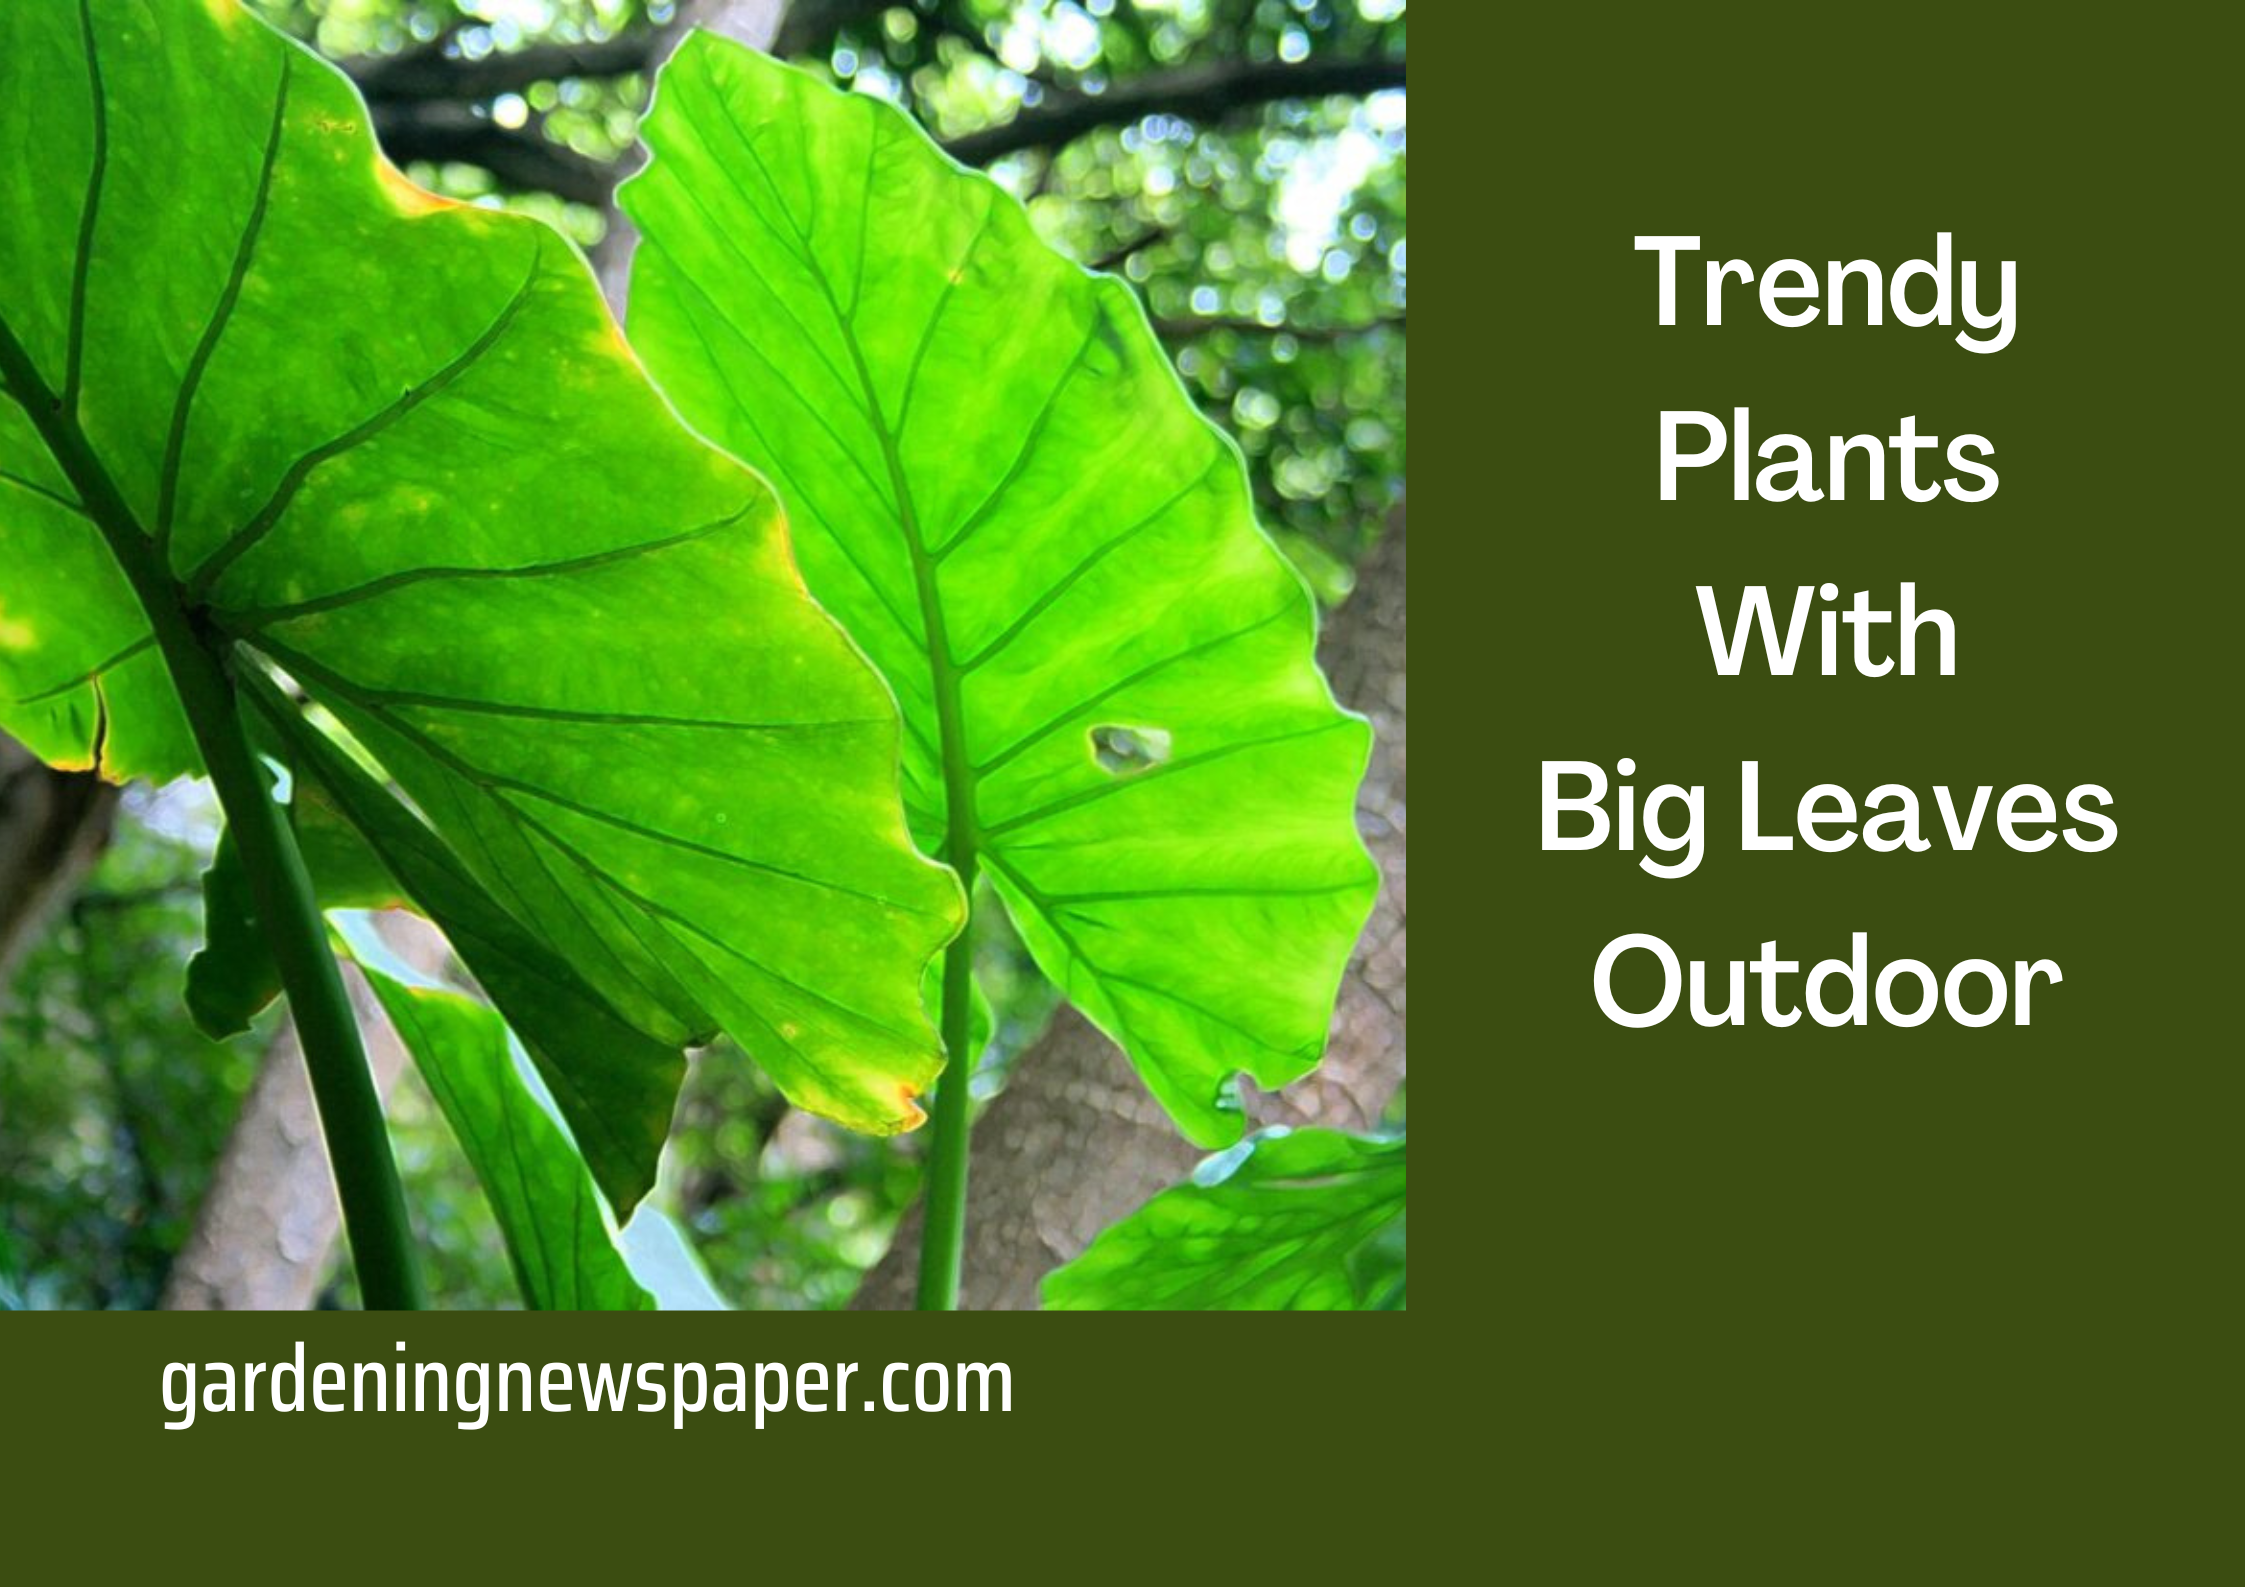 Trendy Plants With Big Leaves Outdoor